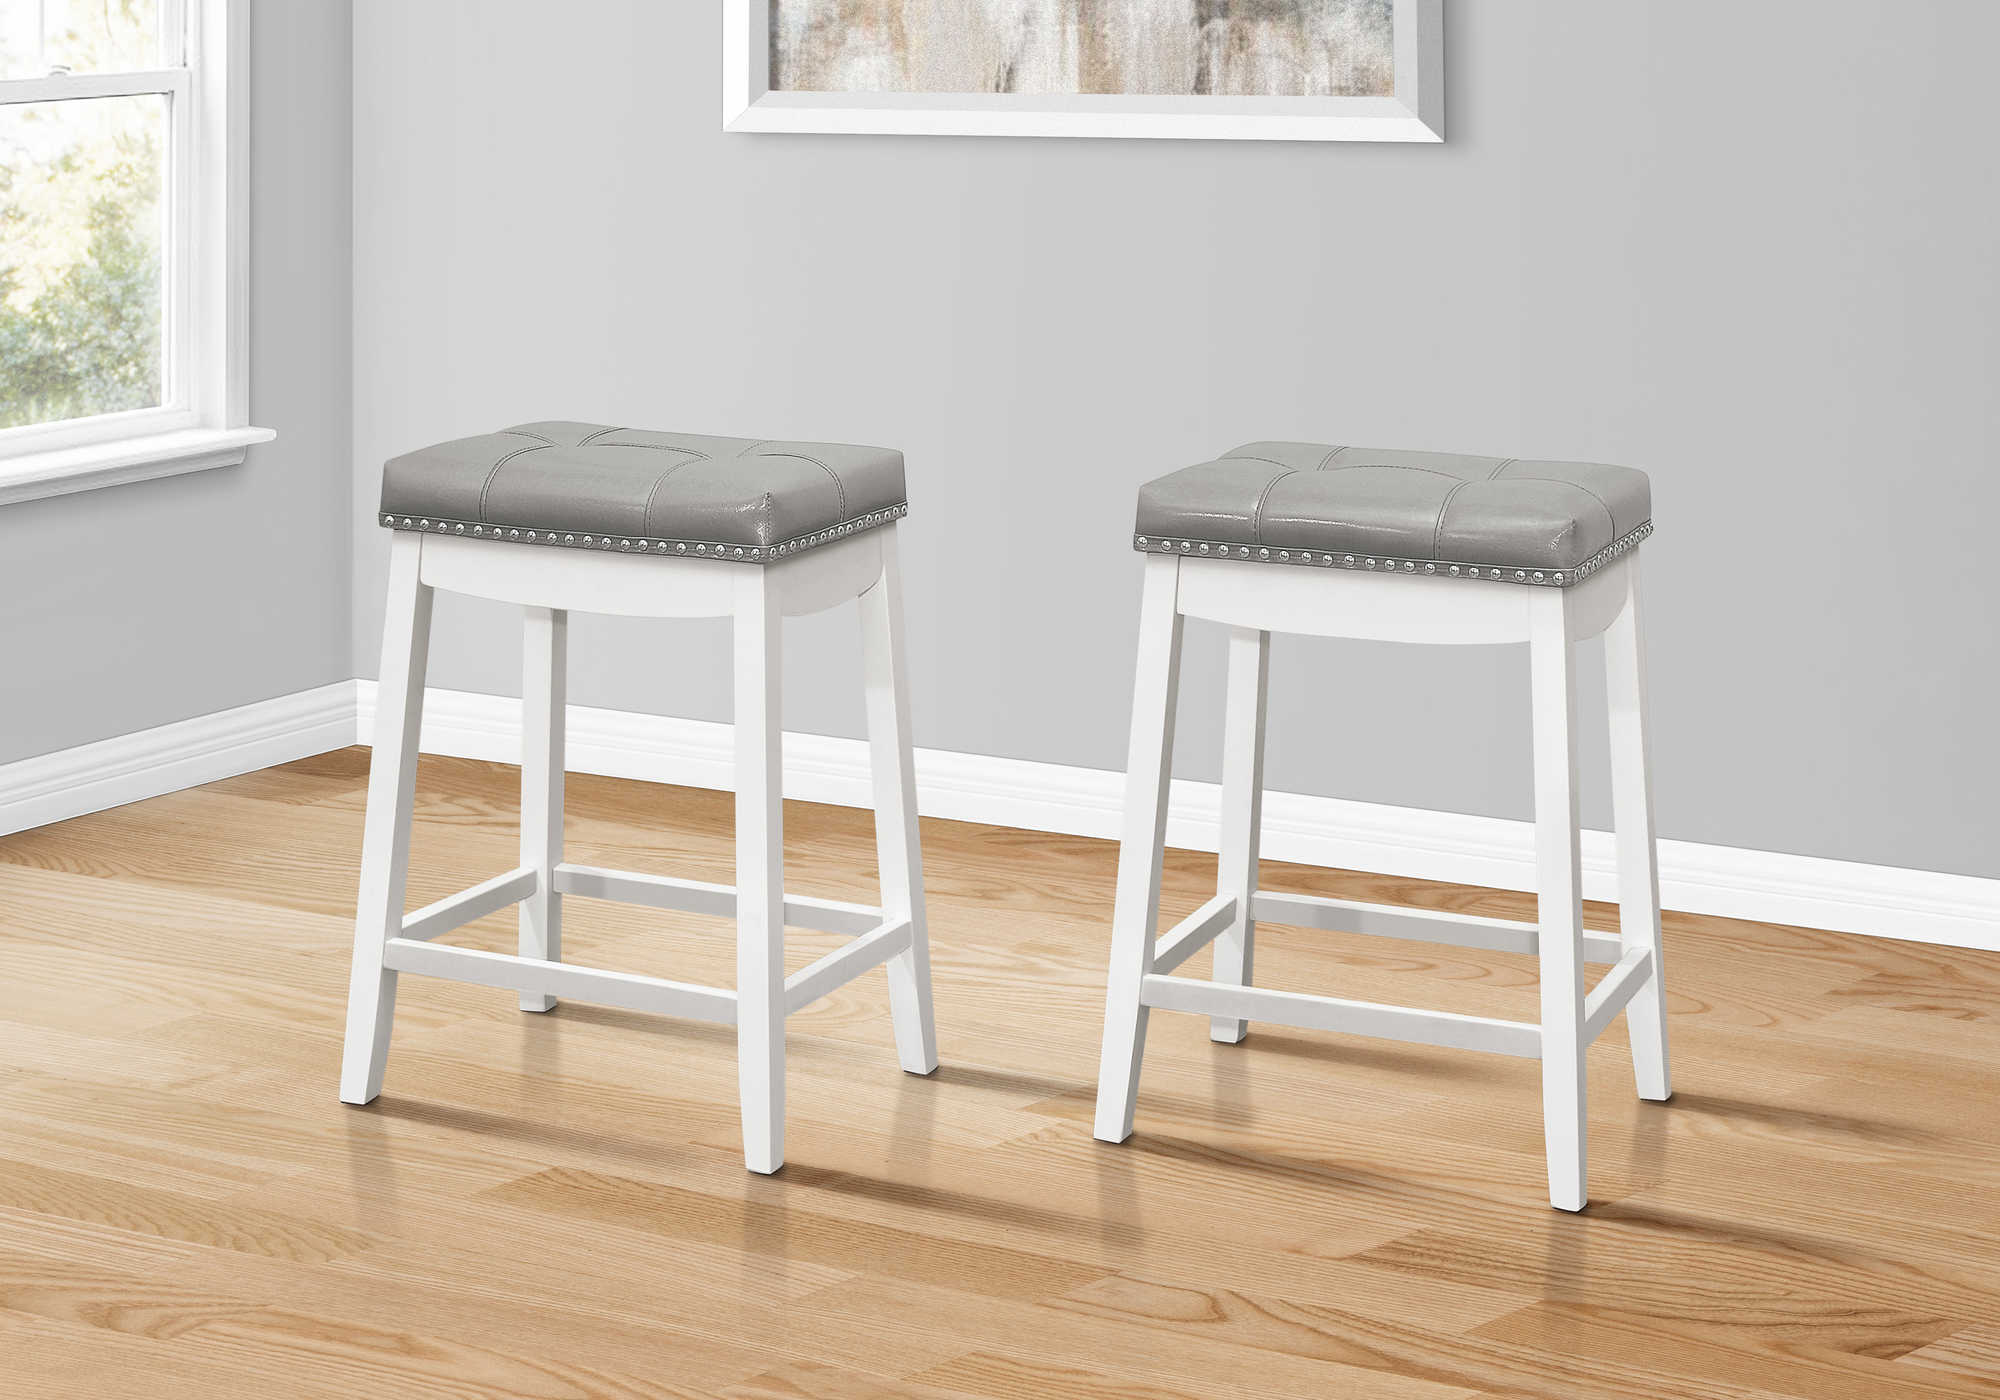 BARSTOOL - 2PCS / 24"H / GREY LEATHER-LOOK / WHITE 